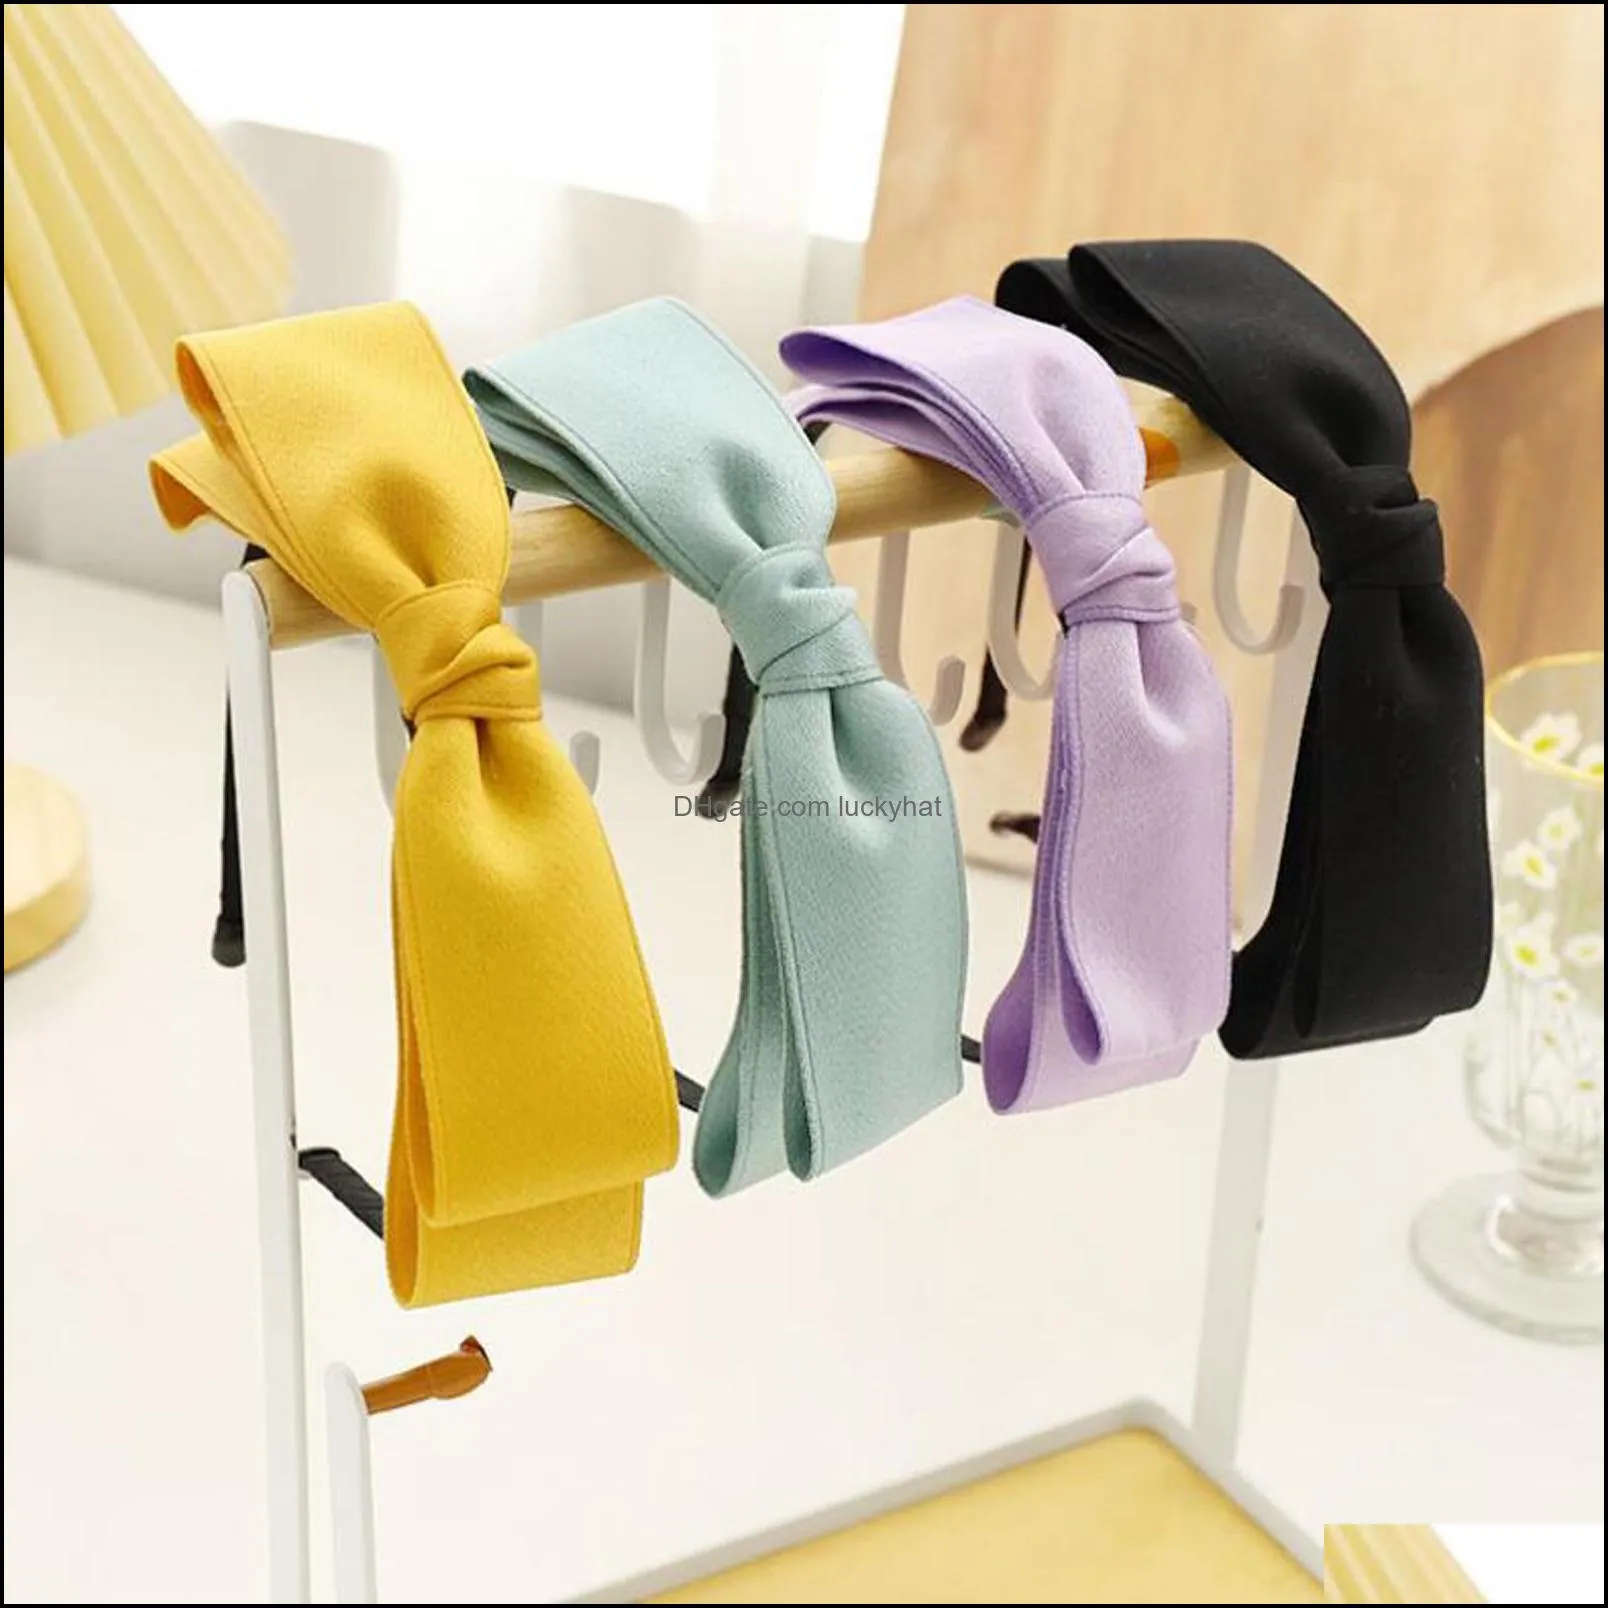 New Vintage Headband For Women Big Bowknot Simple Classic Hairband Solid Color Casual Headwear Adult Hair Accessories